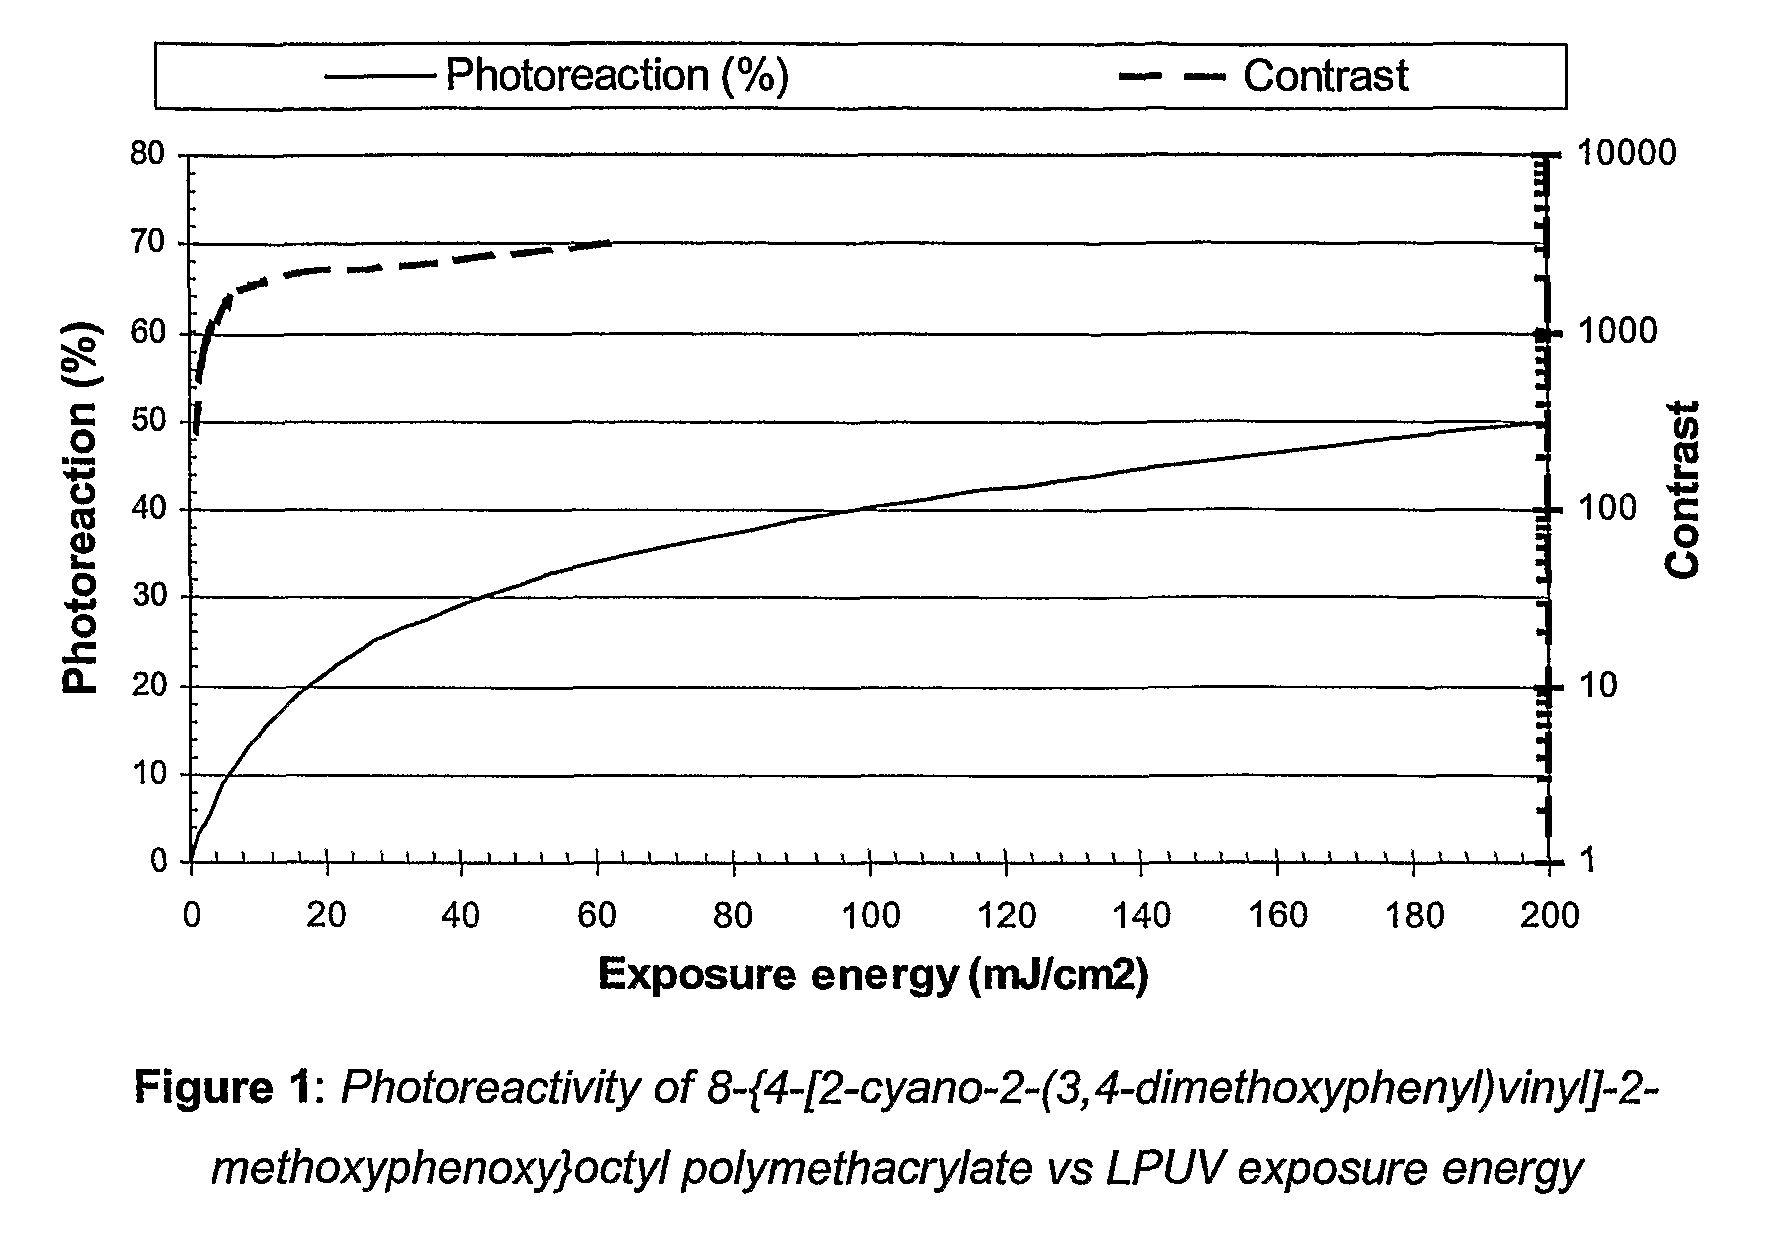 Functionalized photoreactive compounds